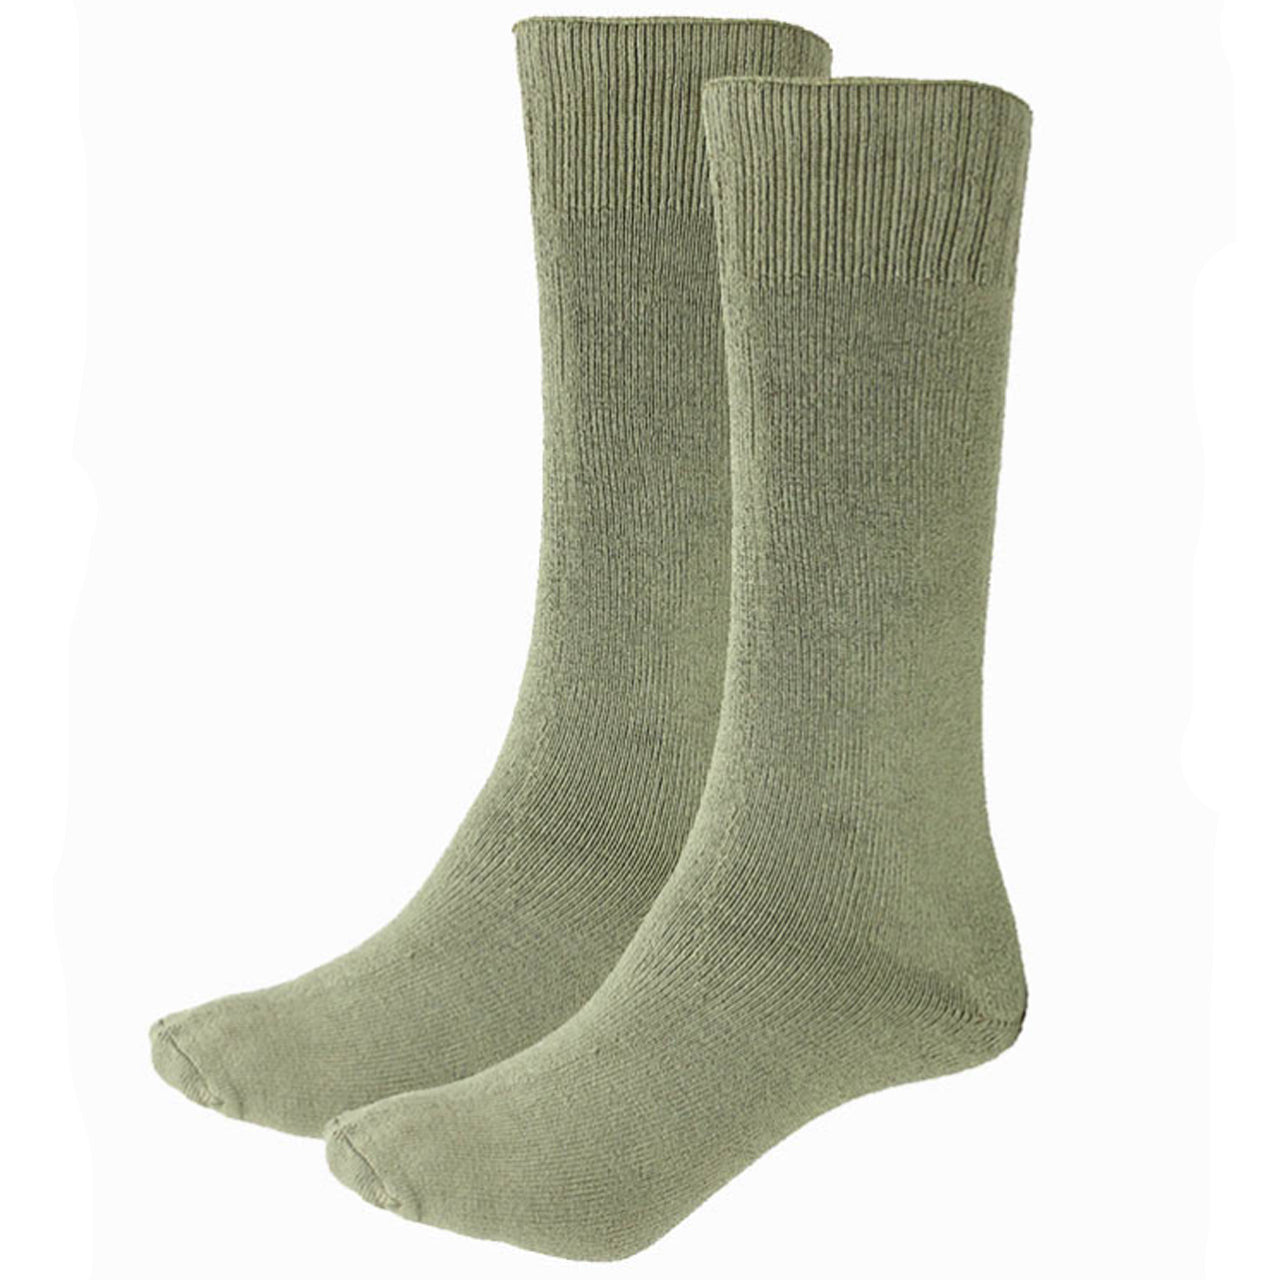 These are not your ordinary socks, the sort of pair that’s design to separate the normal pair to good quality standards introducing the bamboo socks. Blend of bamboo fibres, one of nature finest fibres combined with nylon, grants a natural sensation against your skin while the nylon improves durability and moisture from your feet. www.defenceqstore.com.au